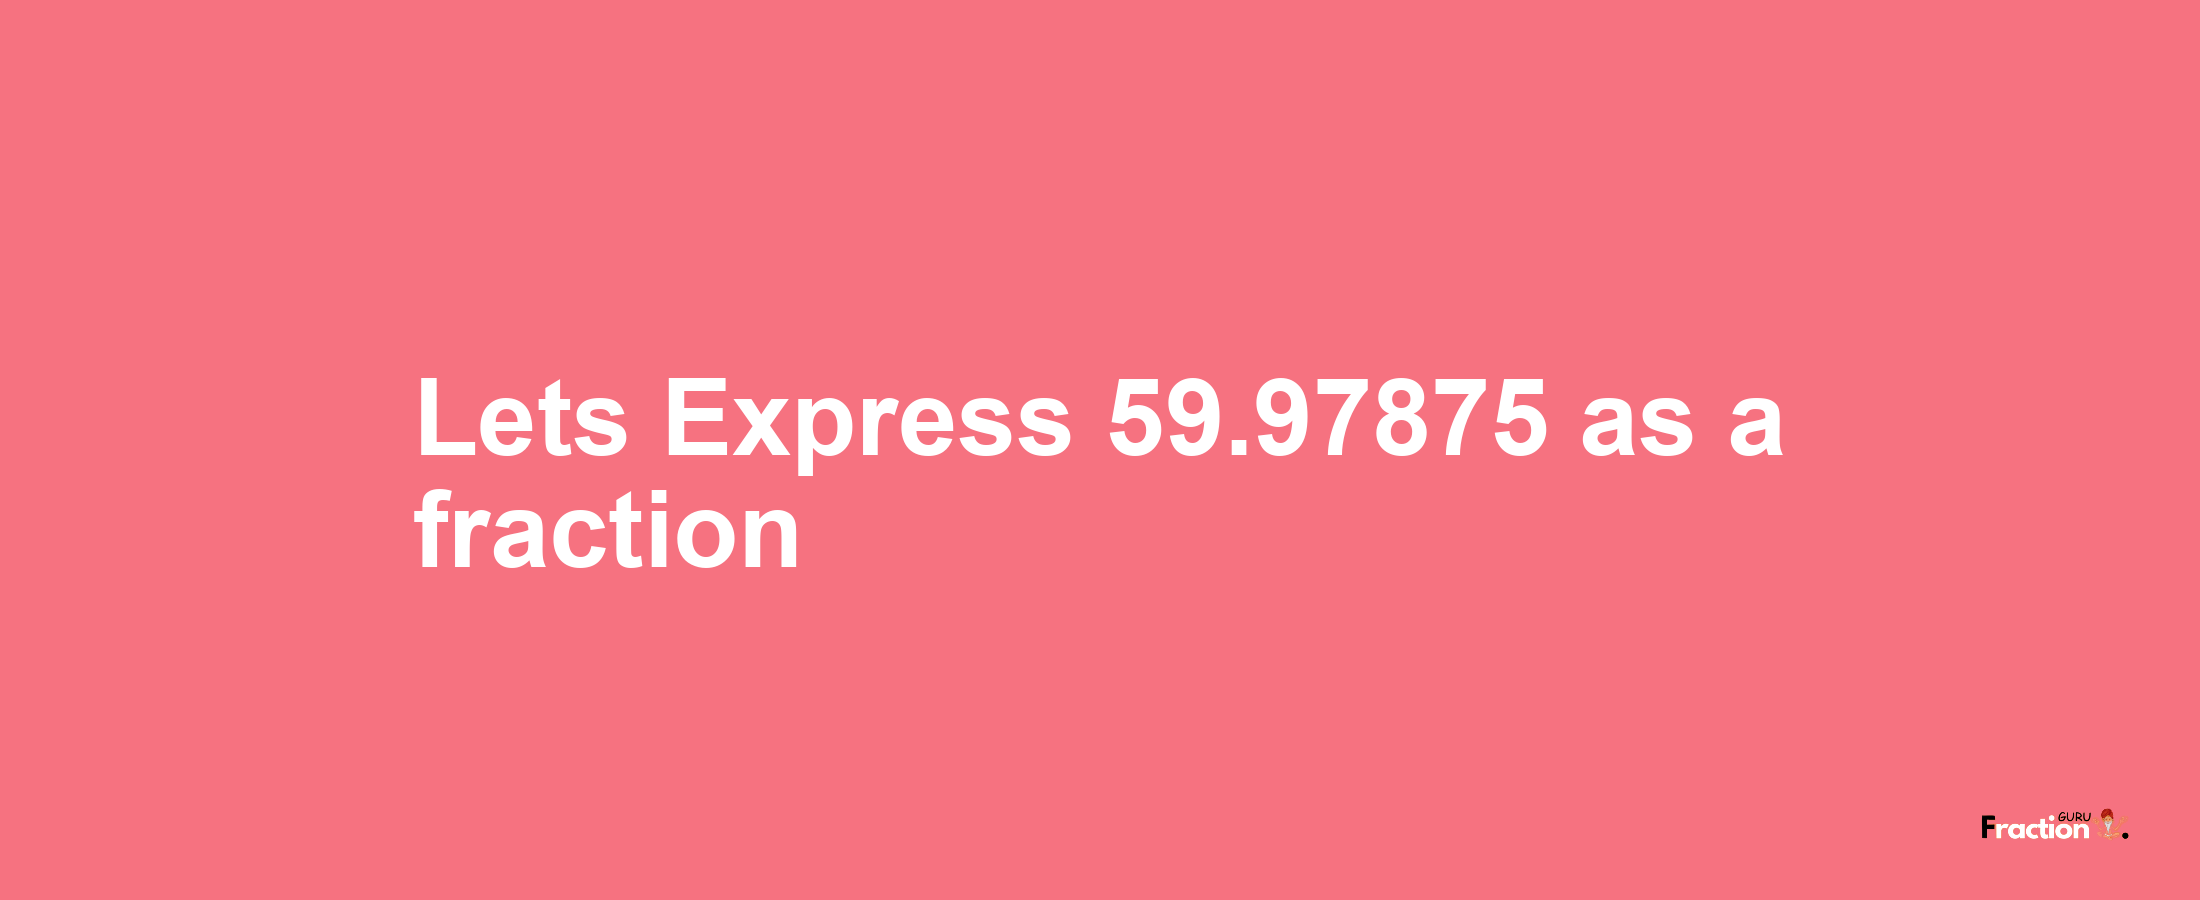 Lets Express 59.97875 as afraction